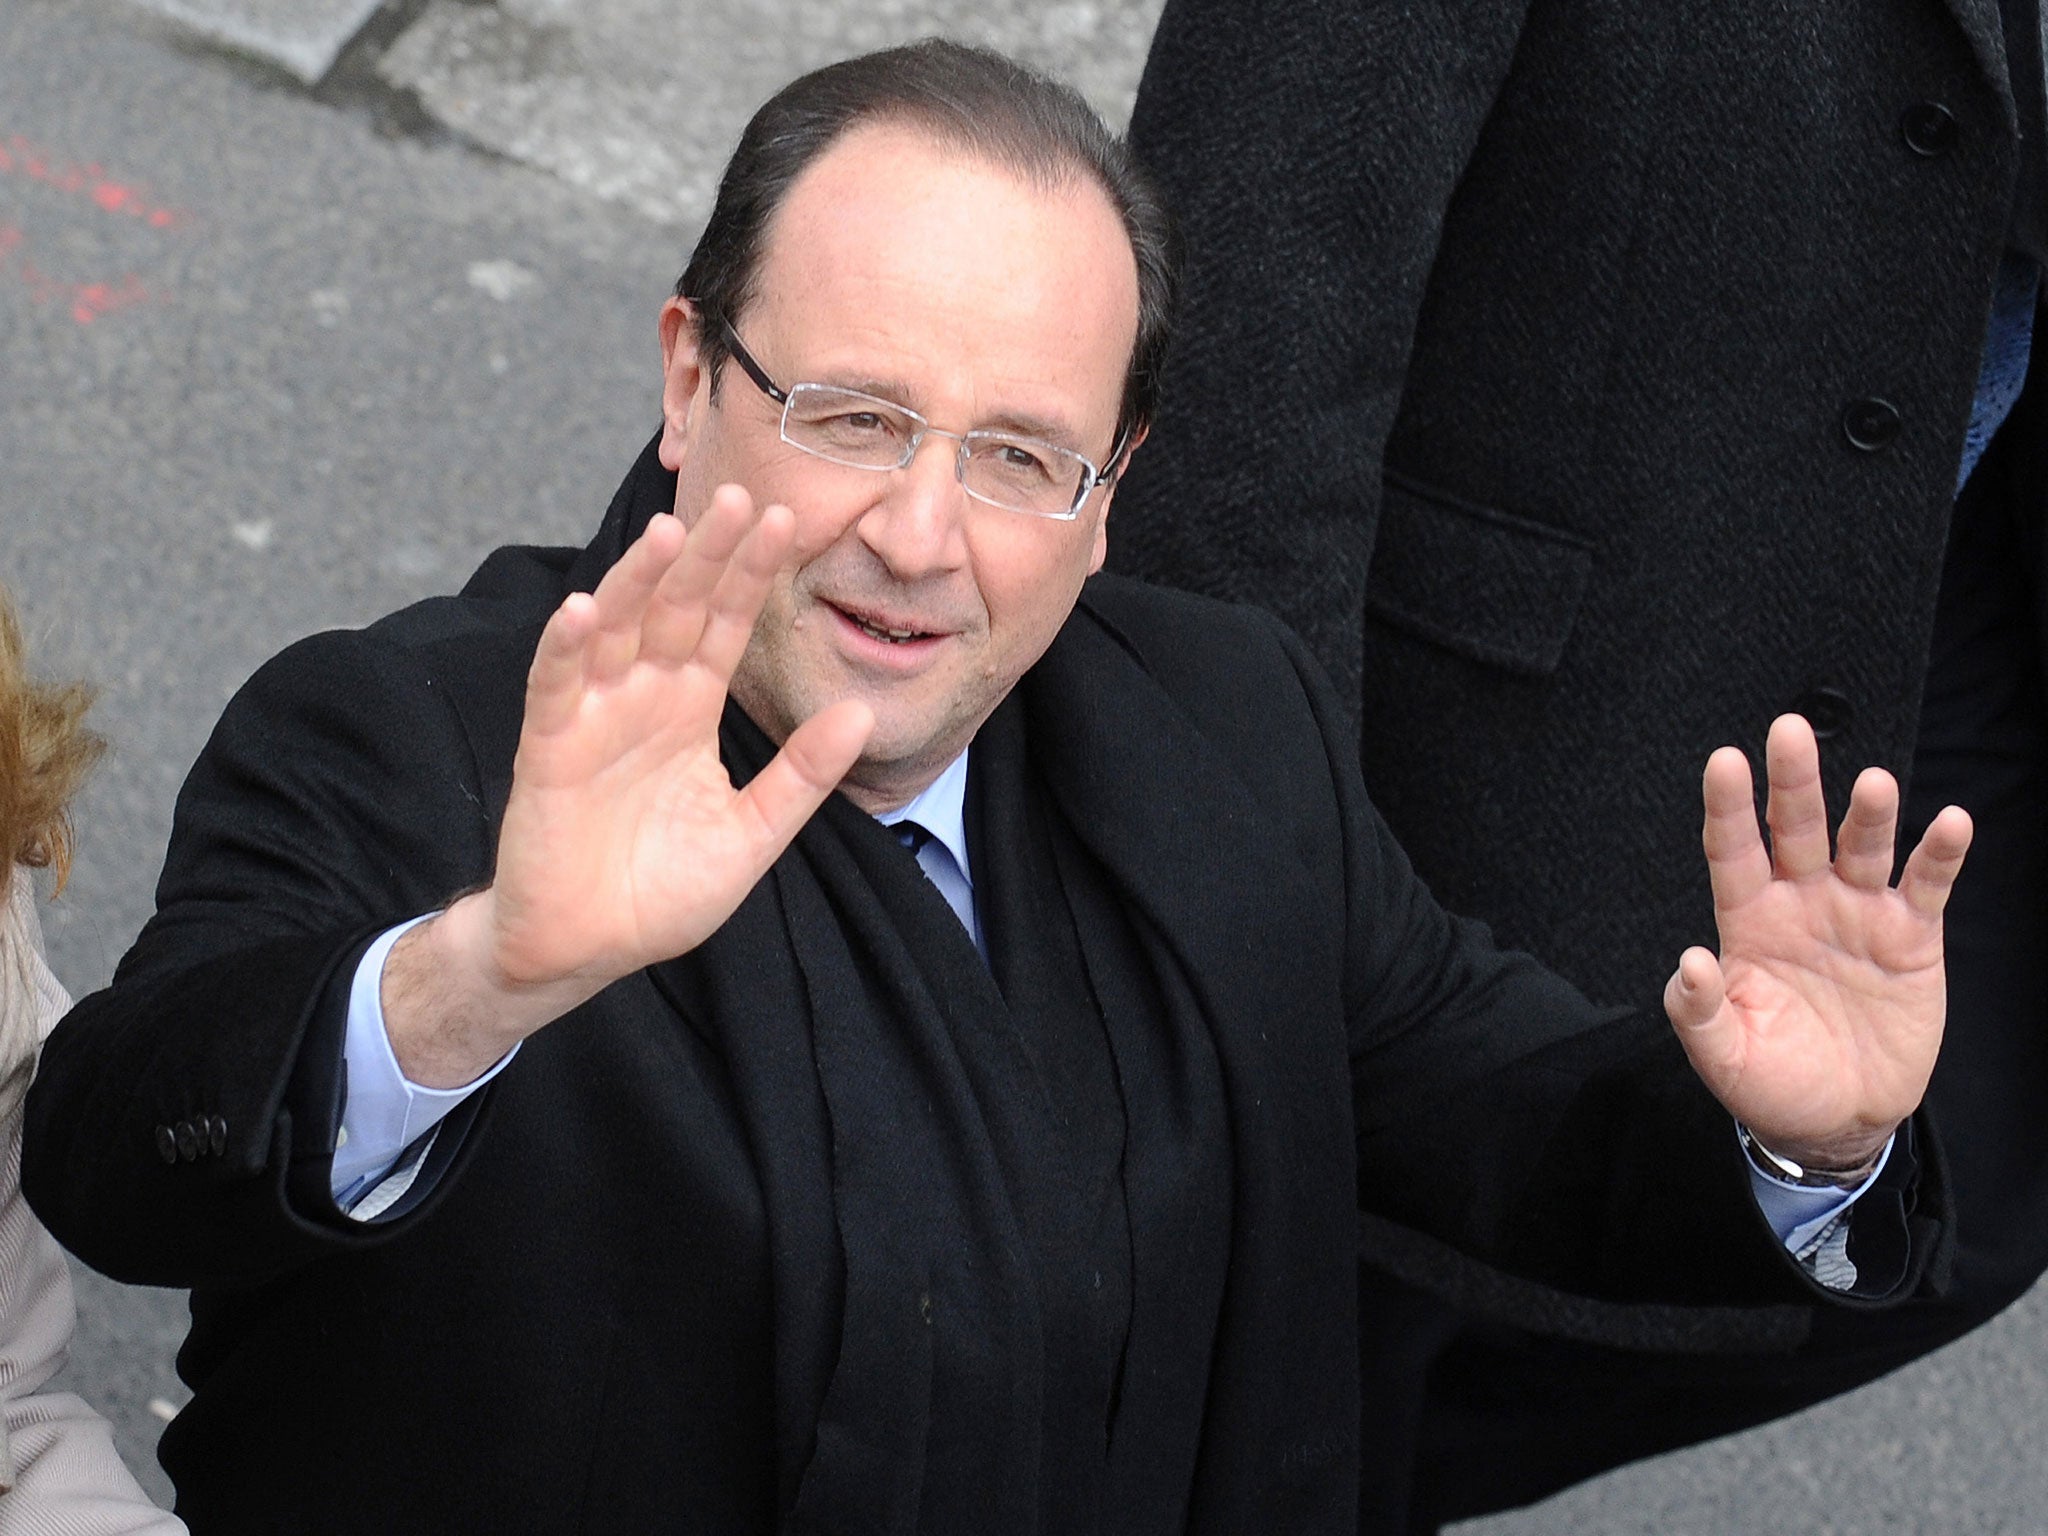 French President Francois Hollande waves as he walks in a street in Tulle, southern France, on April 6, 2013.